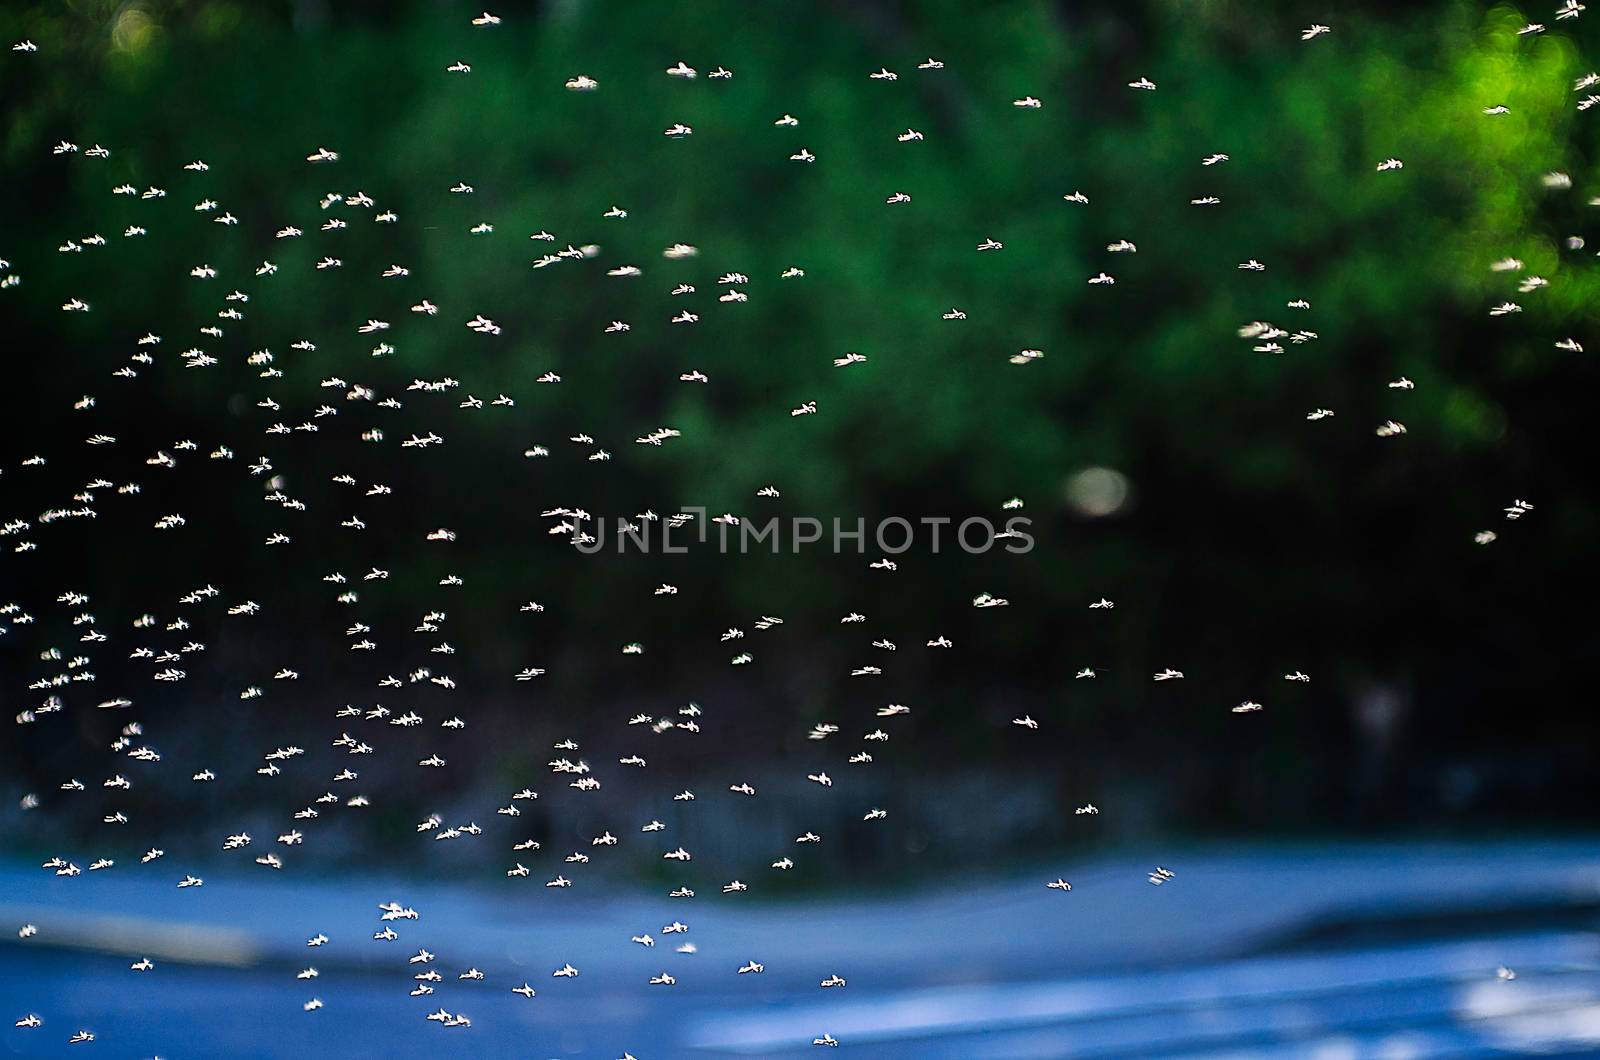 Many insects flying in the air. Mosquitoes swarm flying within dusk. by KajaNi